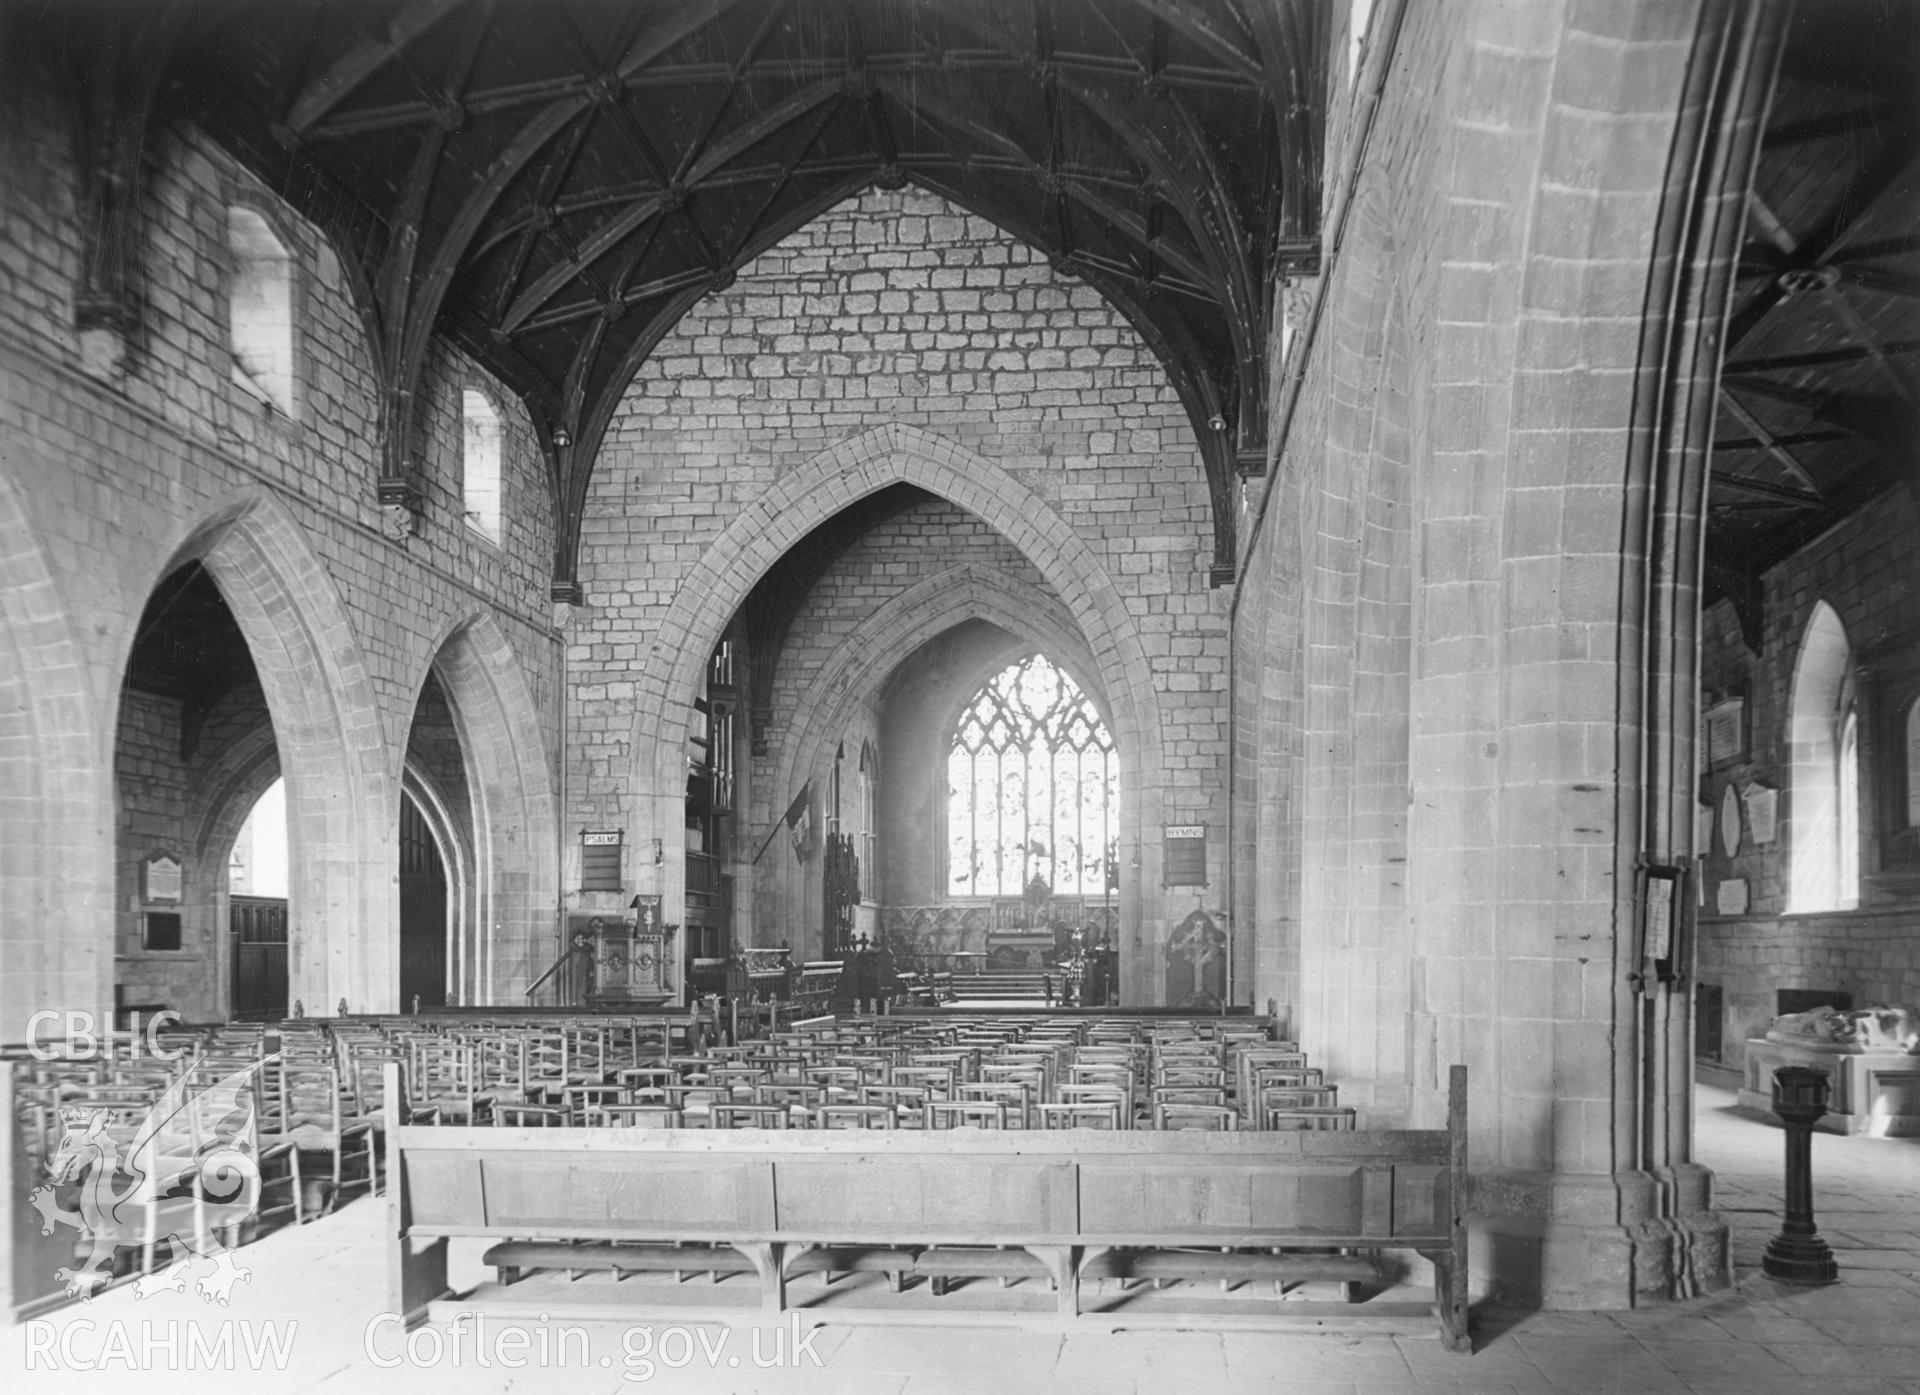 1 b/w print showing interior view of St Asaph Cathedral, collated by the former Central Office of Information.